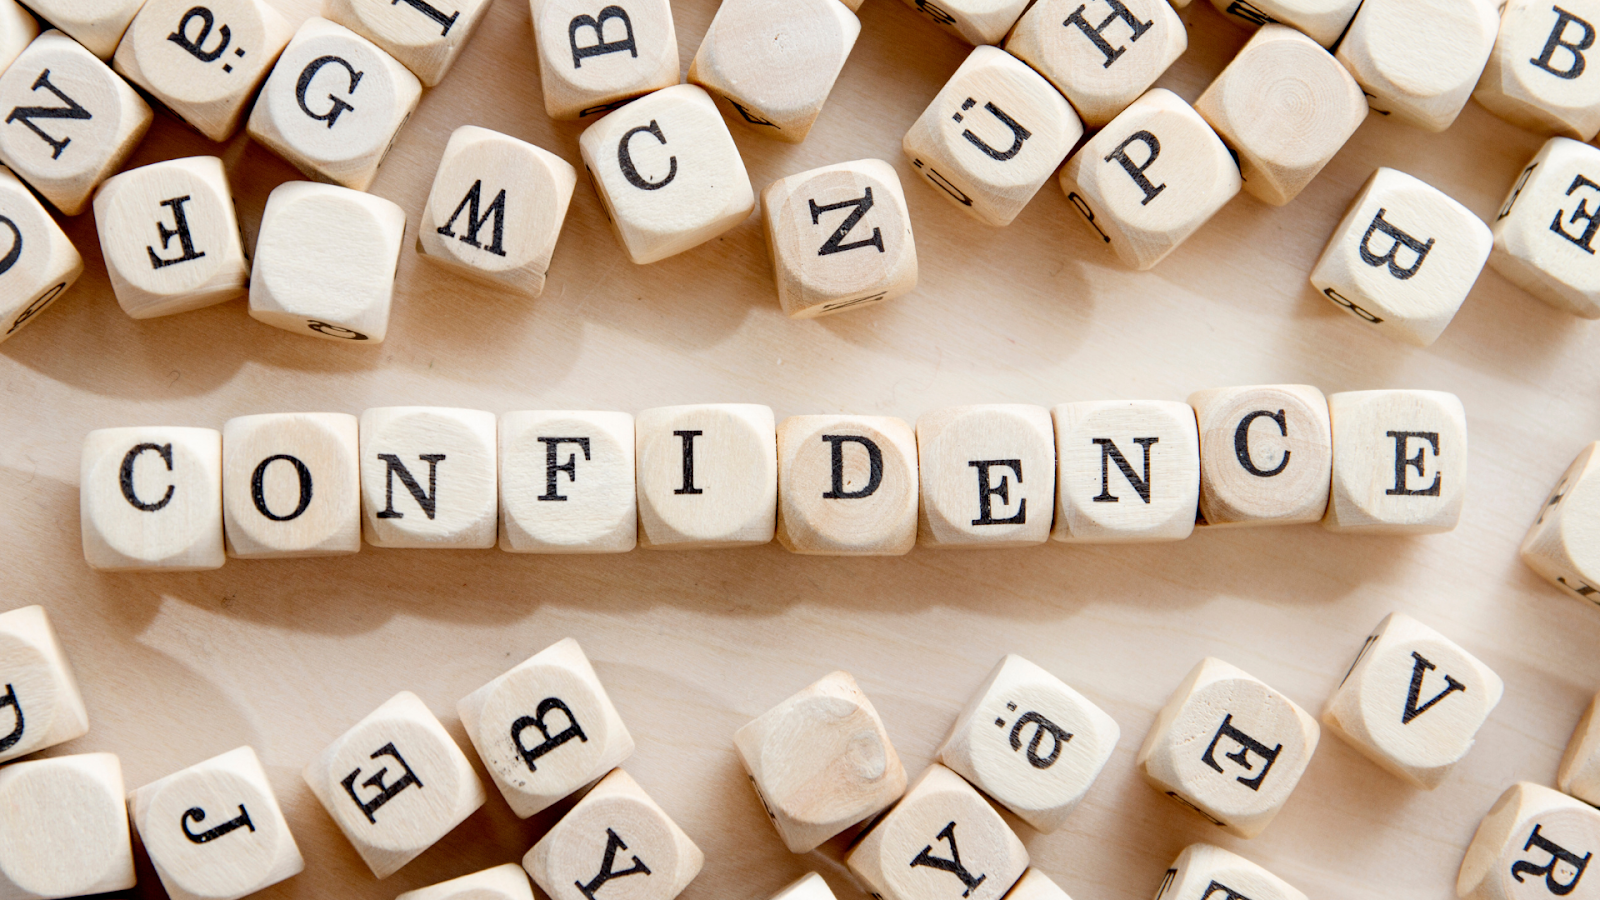 the word confidence spelled out in wooden cubes